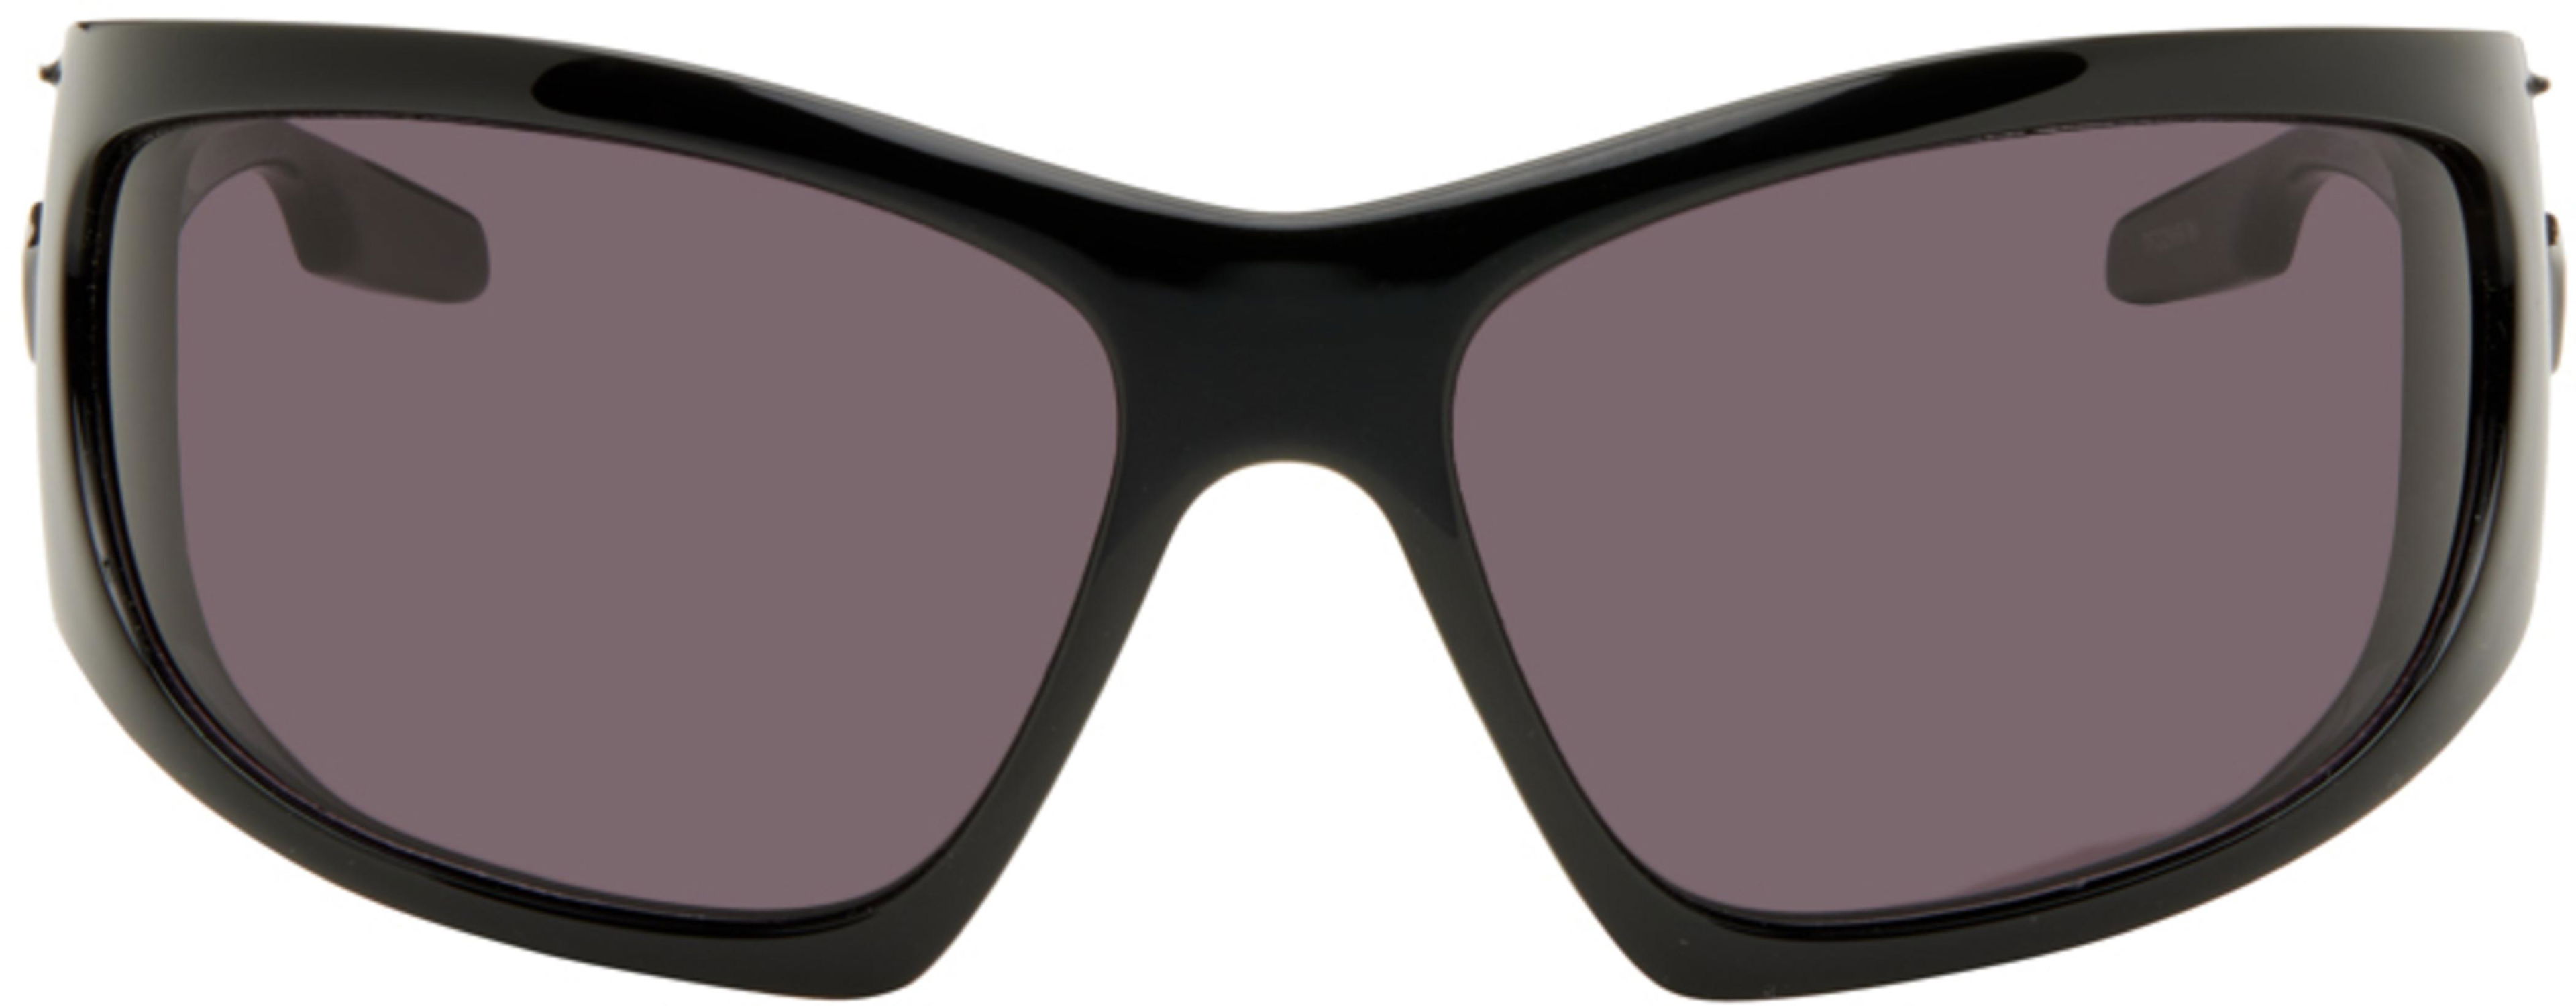 Black Cutout Sunglasses by GIVENCHY